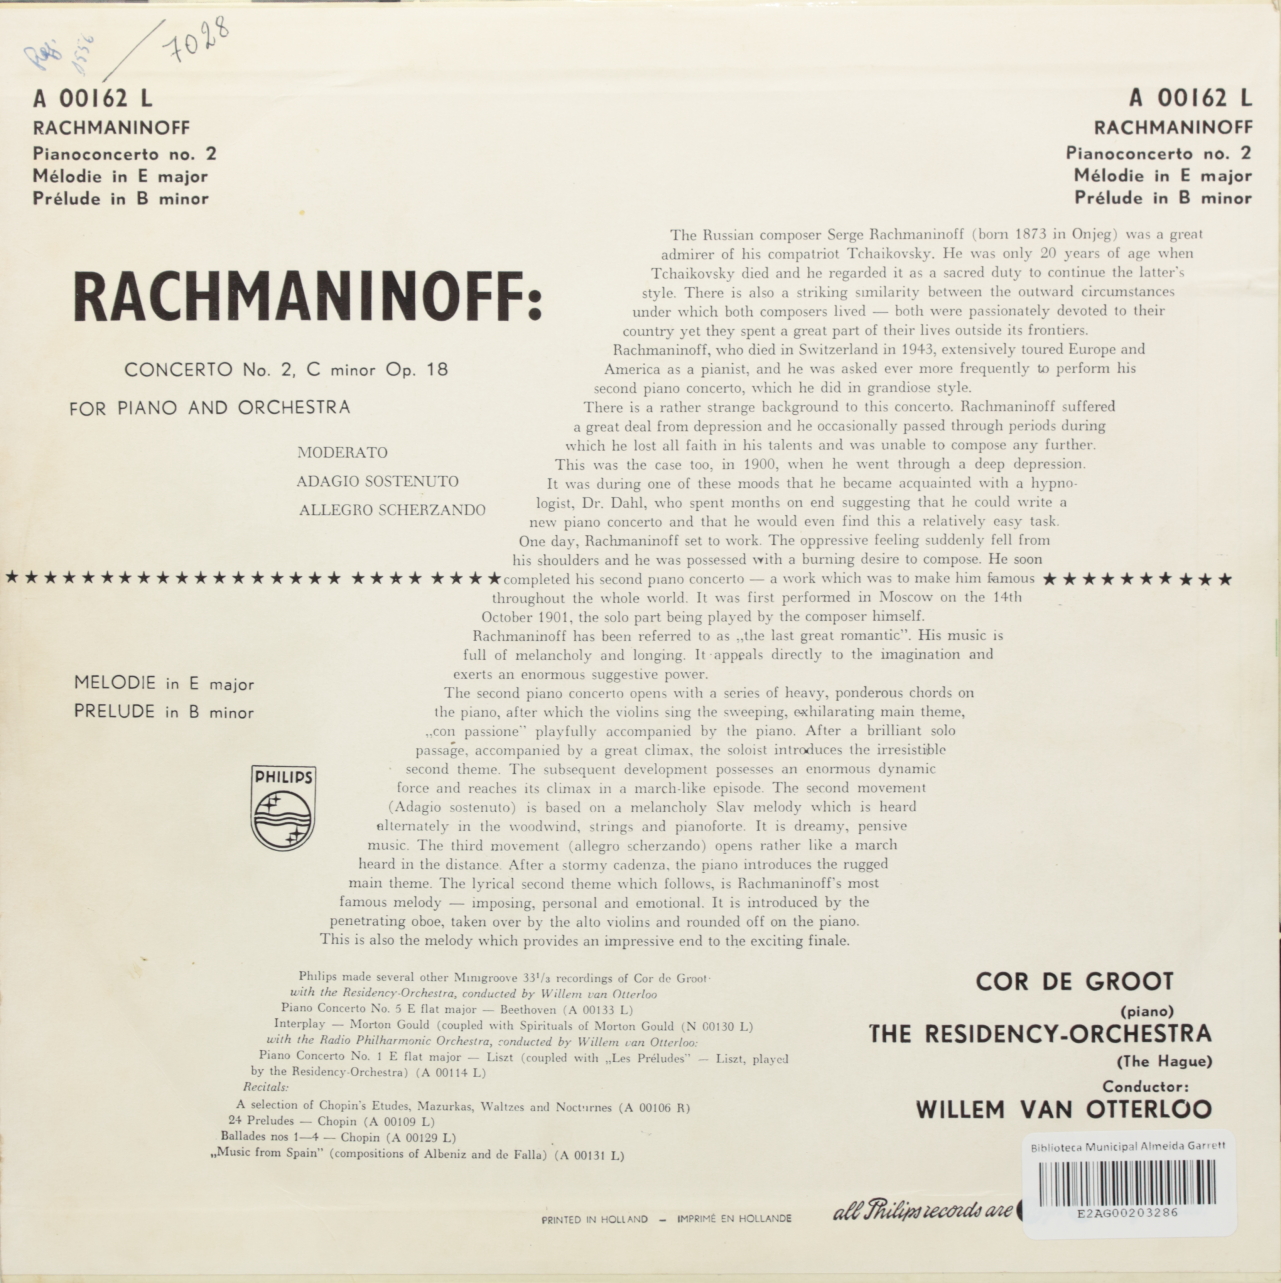 Rachmaninoff: Concerto Nº 2 in C minor op. 18 for Piano and Orchestra; Mélodie in E major Op. 3 N